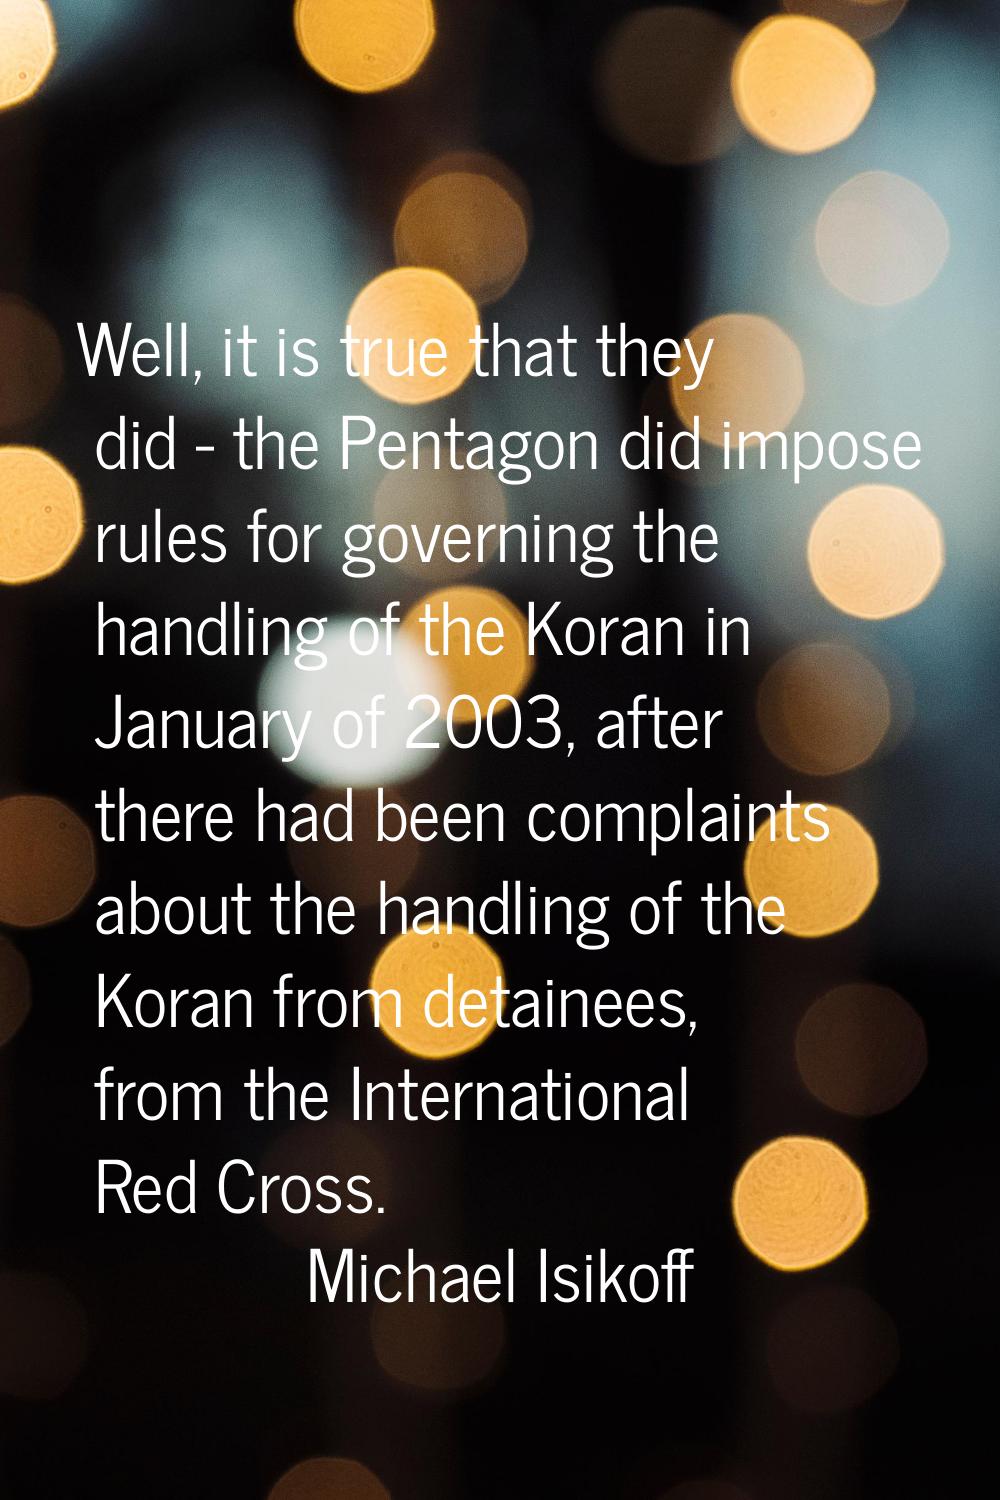 Well, it is true that they did - the Pentagon did impose rules for governing the handling of the Ko